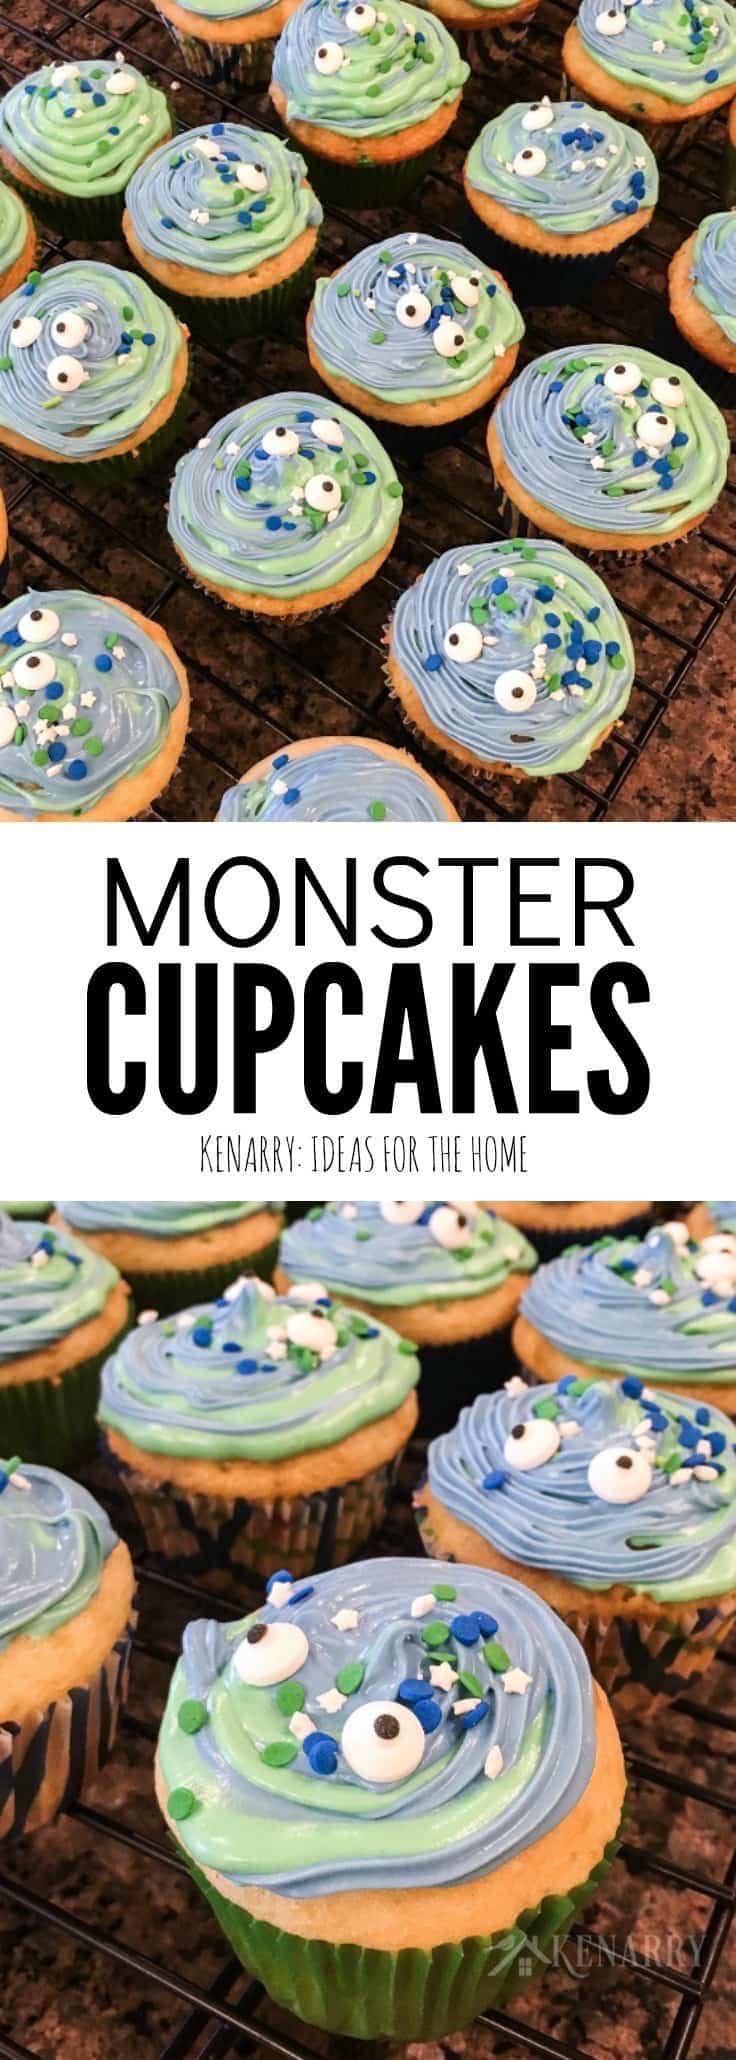 These monster cupcakes with blue and green swirl frosting would be a fun birthday treat or Halloween dessert. With this easy decorating tutorial, they could even pass as aliens!